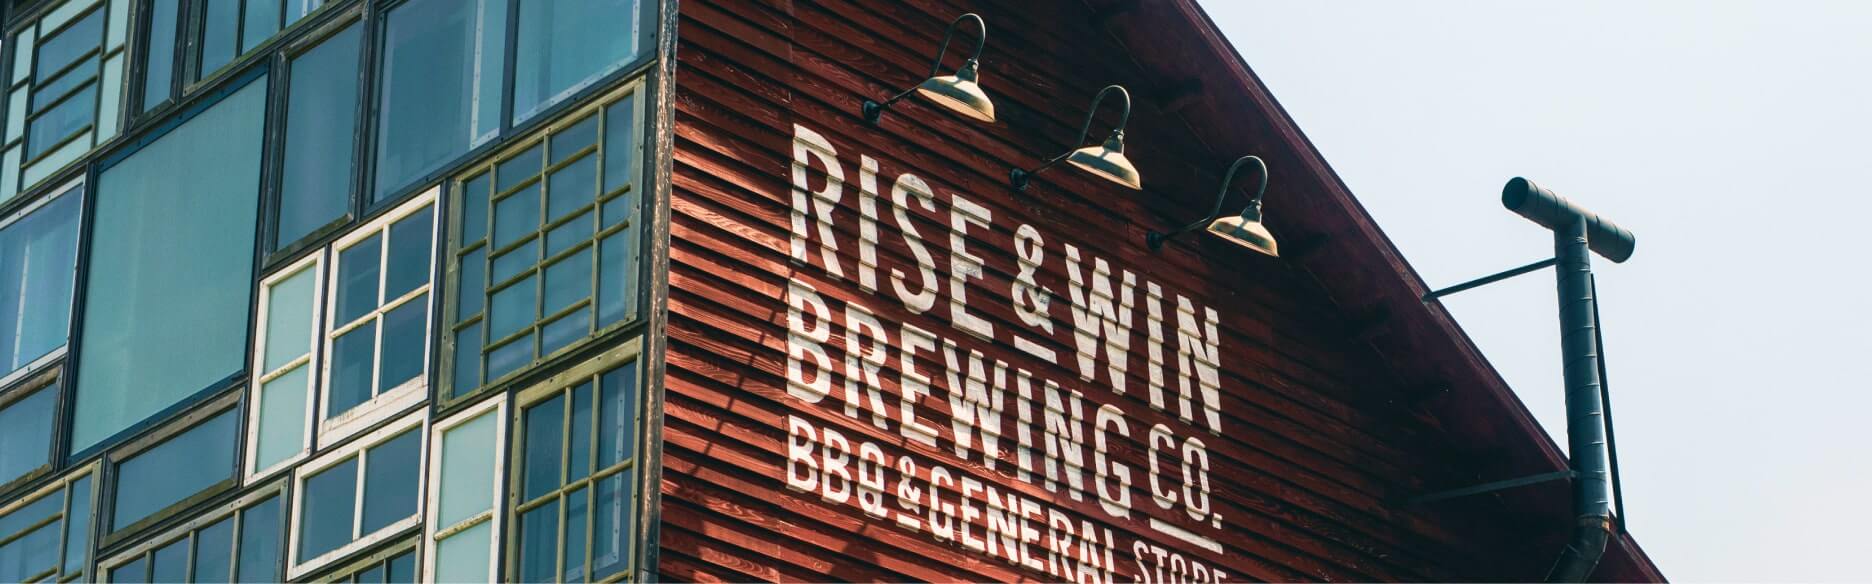 Image：RISE & WIN Brewing Co.